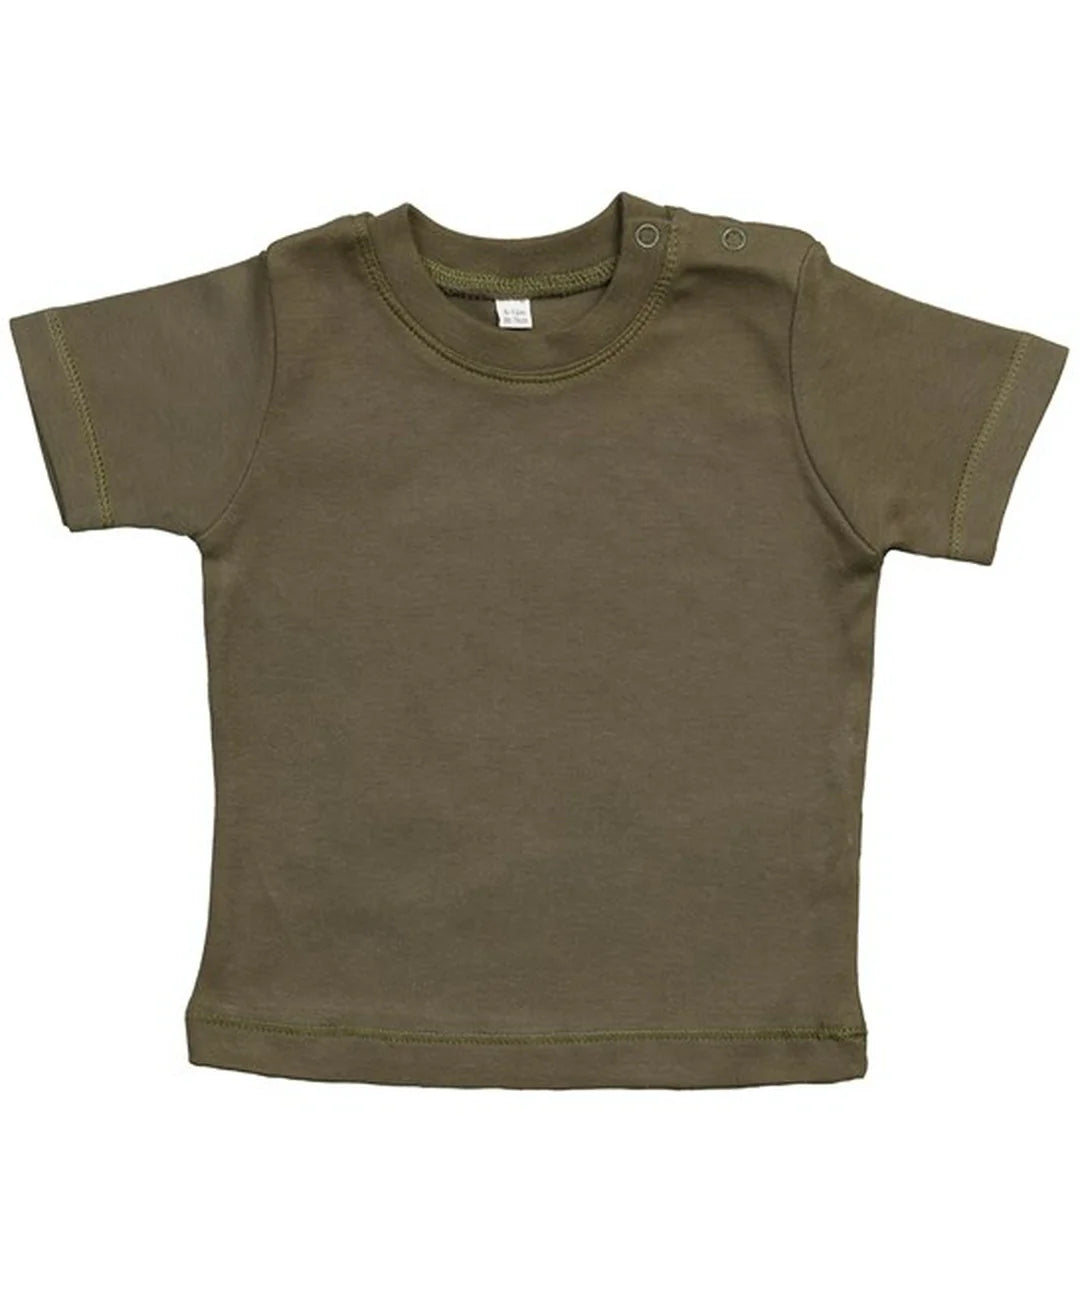 Babybugz Baby T-shirts Other color BZ02 - COOZO